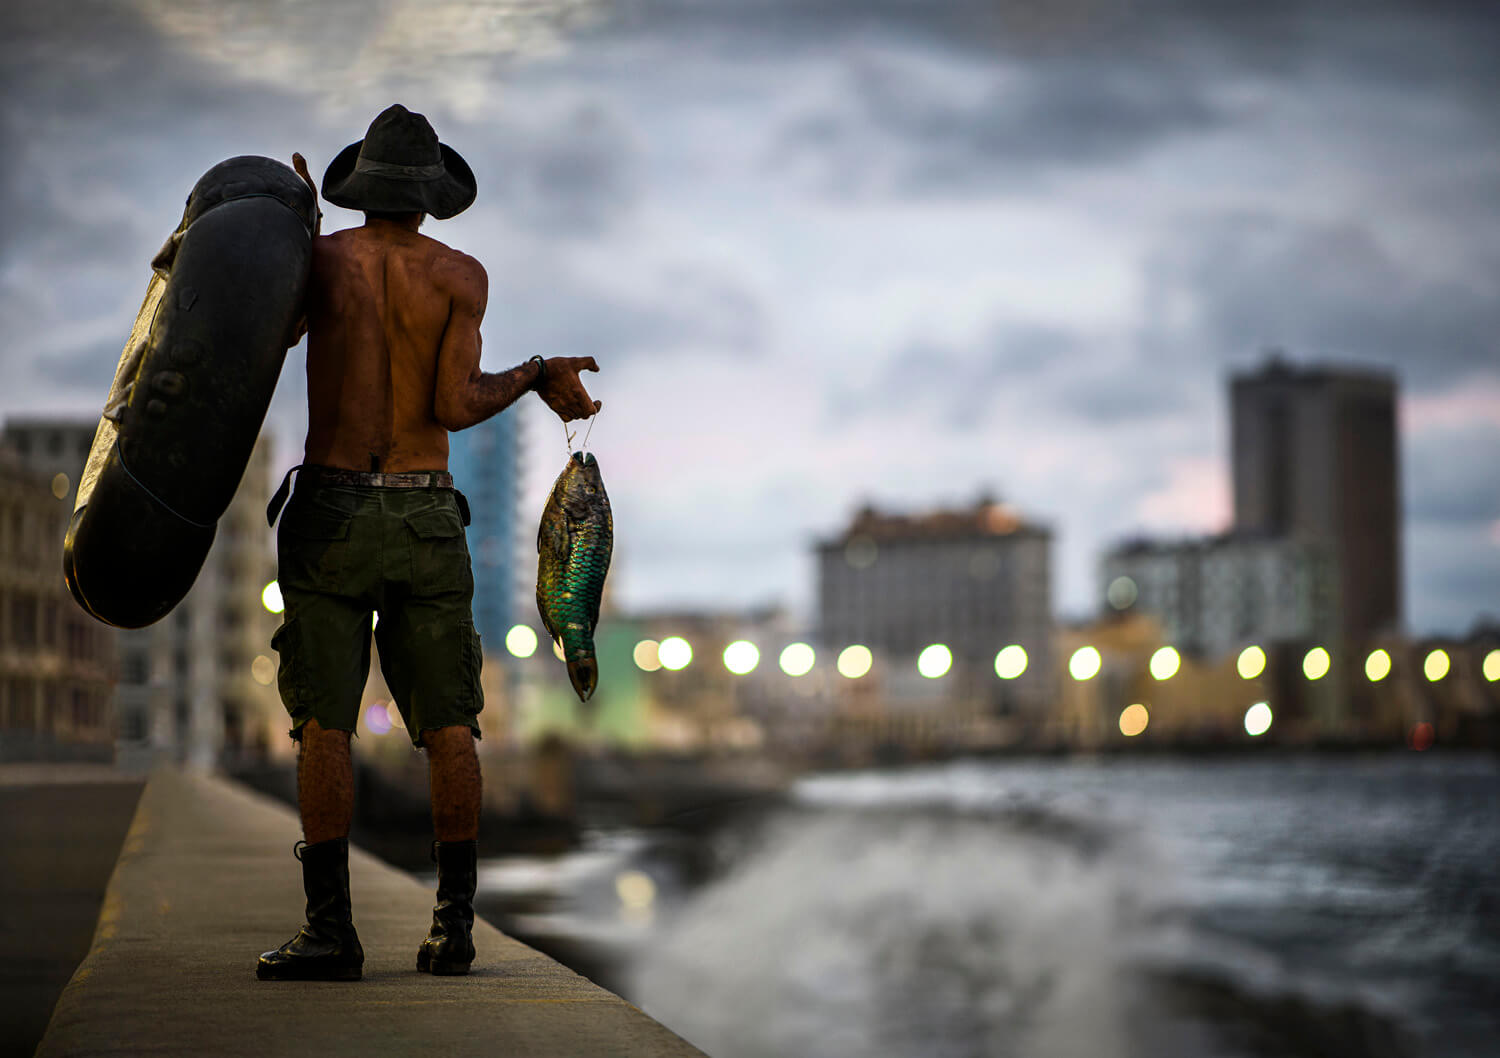 This image captures a man from behind as he walks along a waterfront promenade at dusk. He is shirtless, showcasing a toned physique, and wears a wide-brimmed hat and cargo shorts, with a kit bag over one shoulder and a sizable, glistening fish in the other hand. The blurred cityscape in the background with its string of lights creates a serene atmosphere, highlighting the solitary figure's connection to both the urban environment and the natural world through fishing.